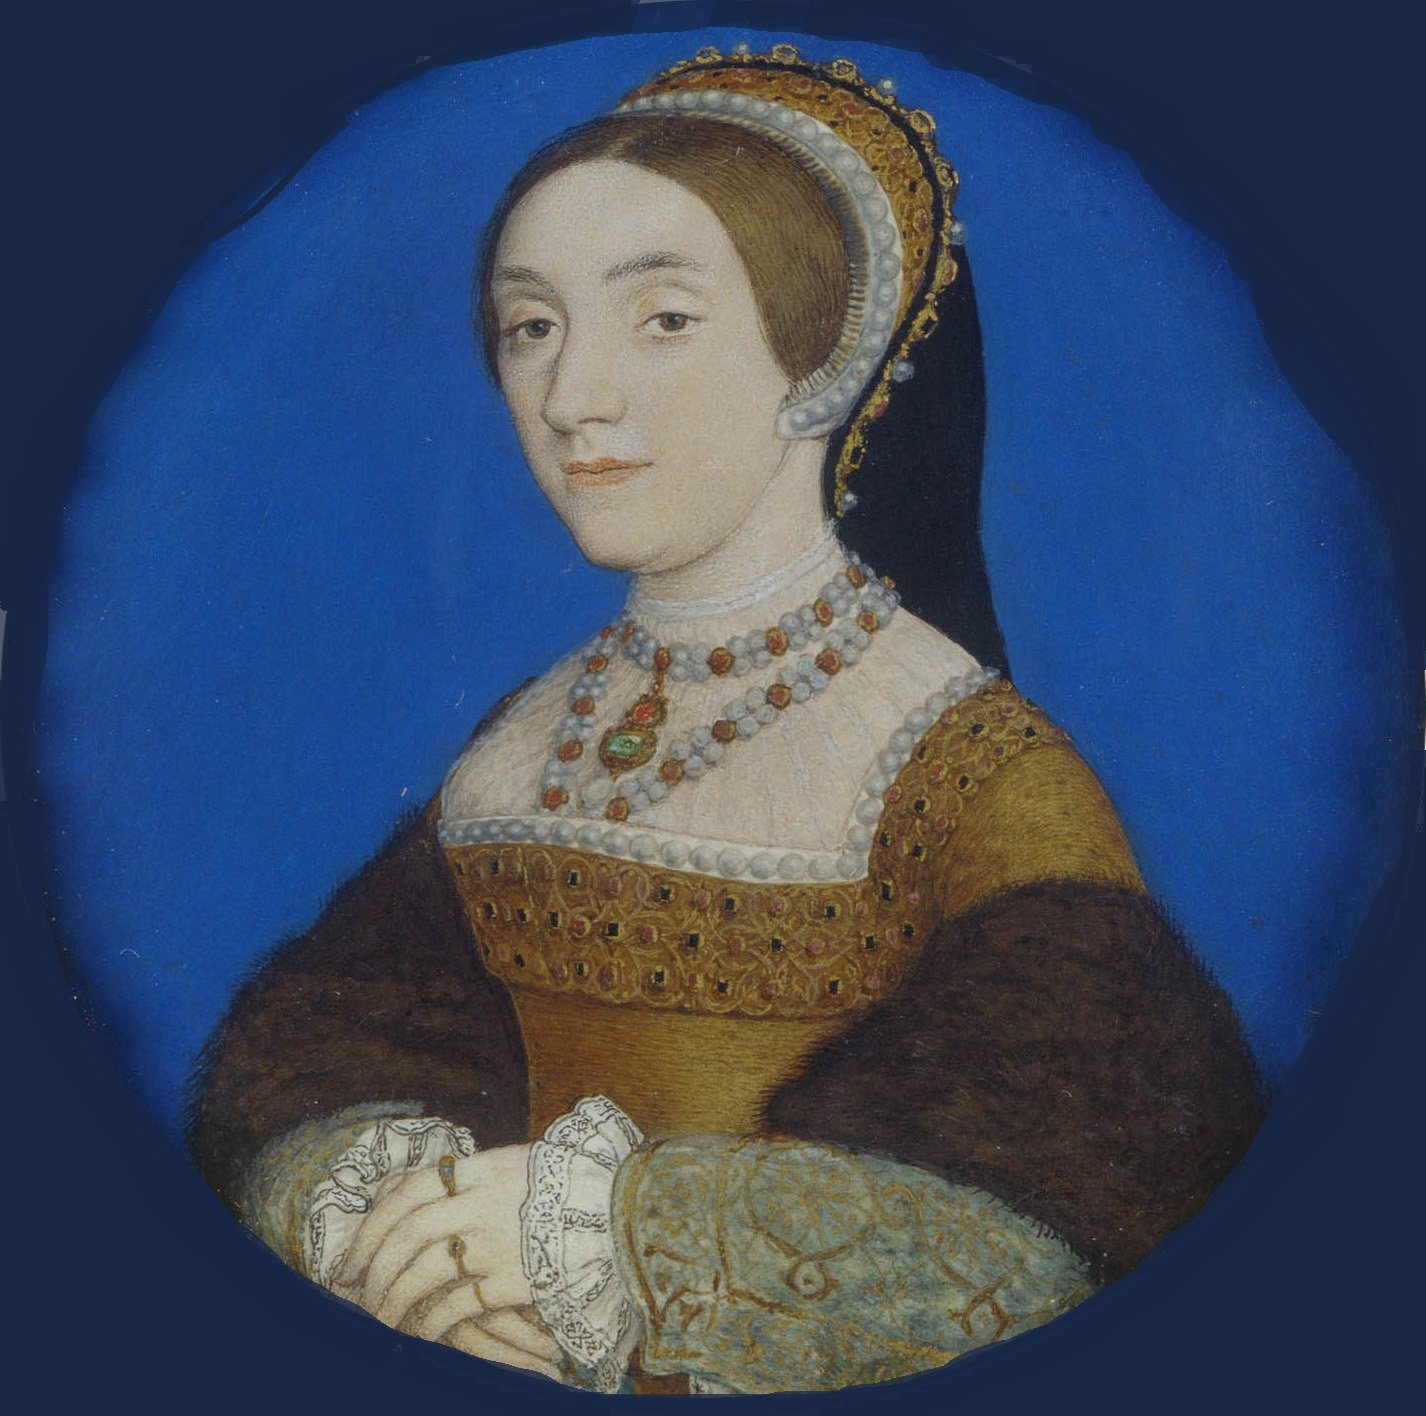 A list of things that you may not have heard about Catherine Howard, queen of England. Beheaded just like her cousin of Anne Boleyn.